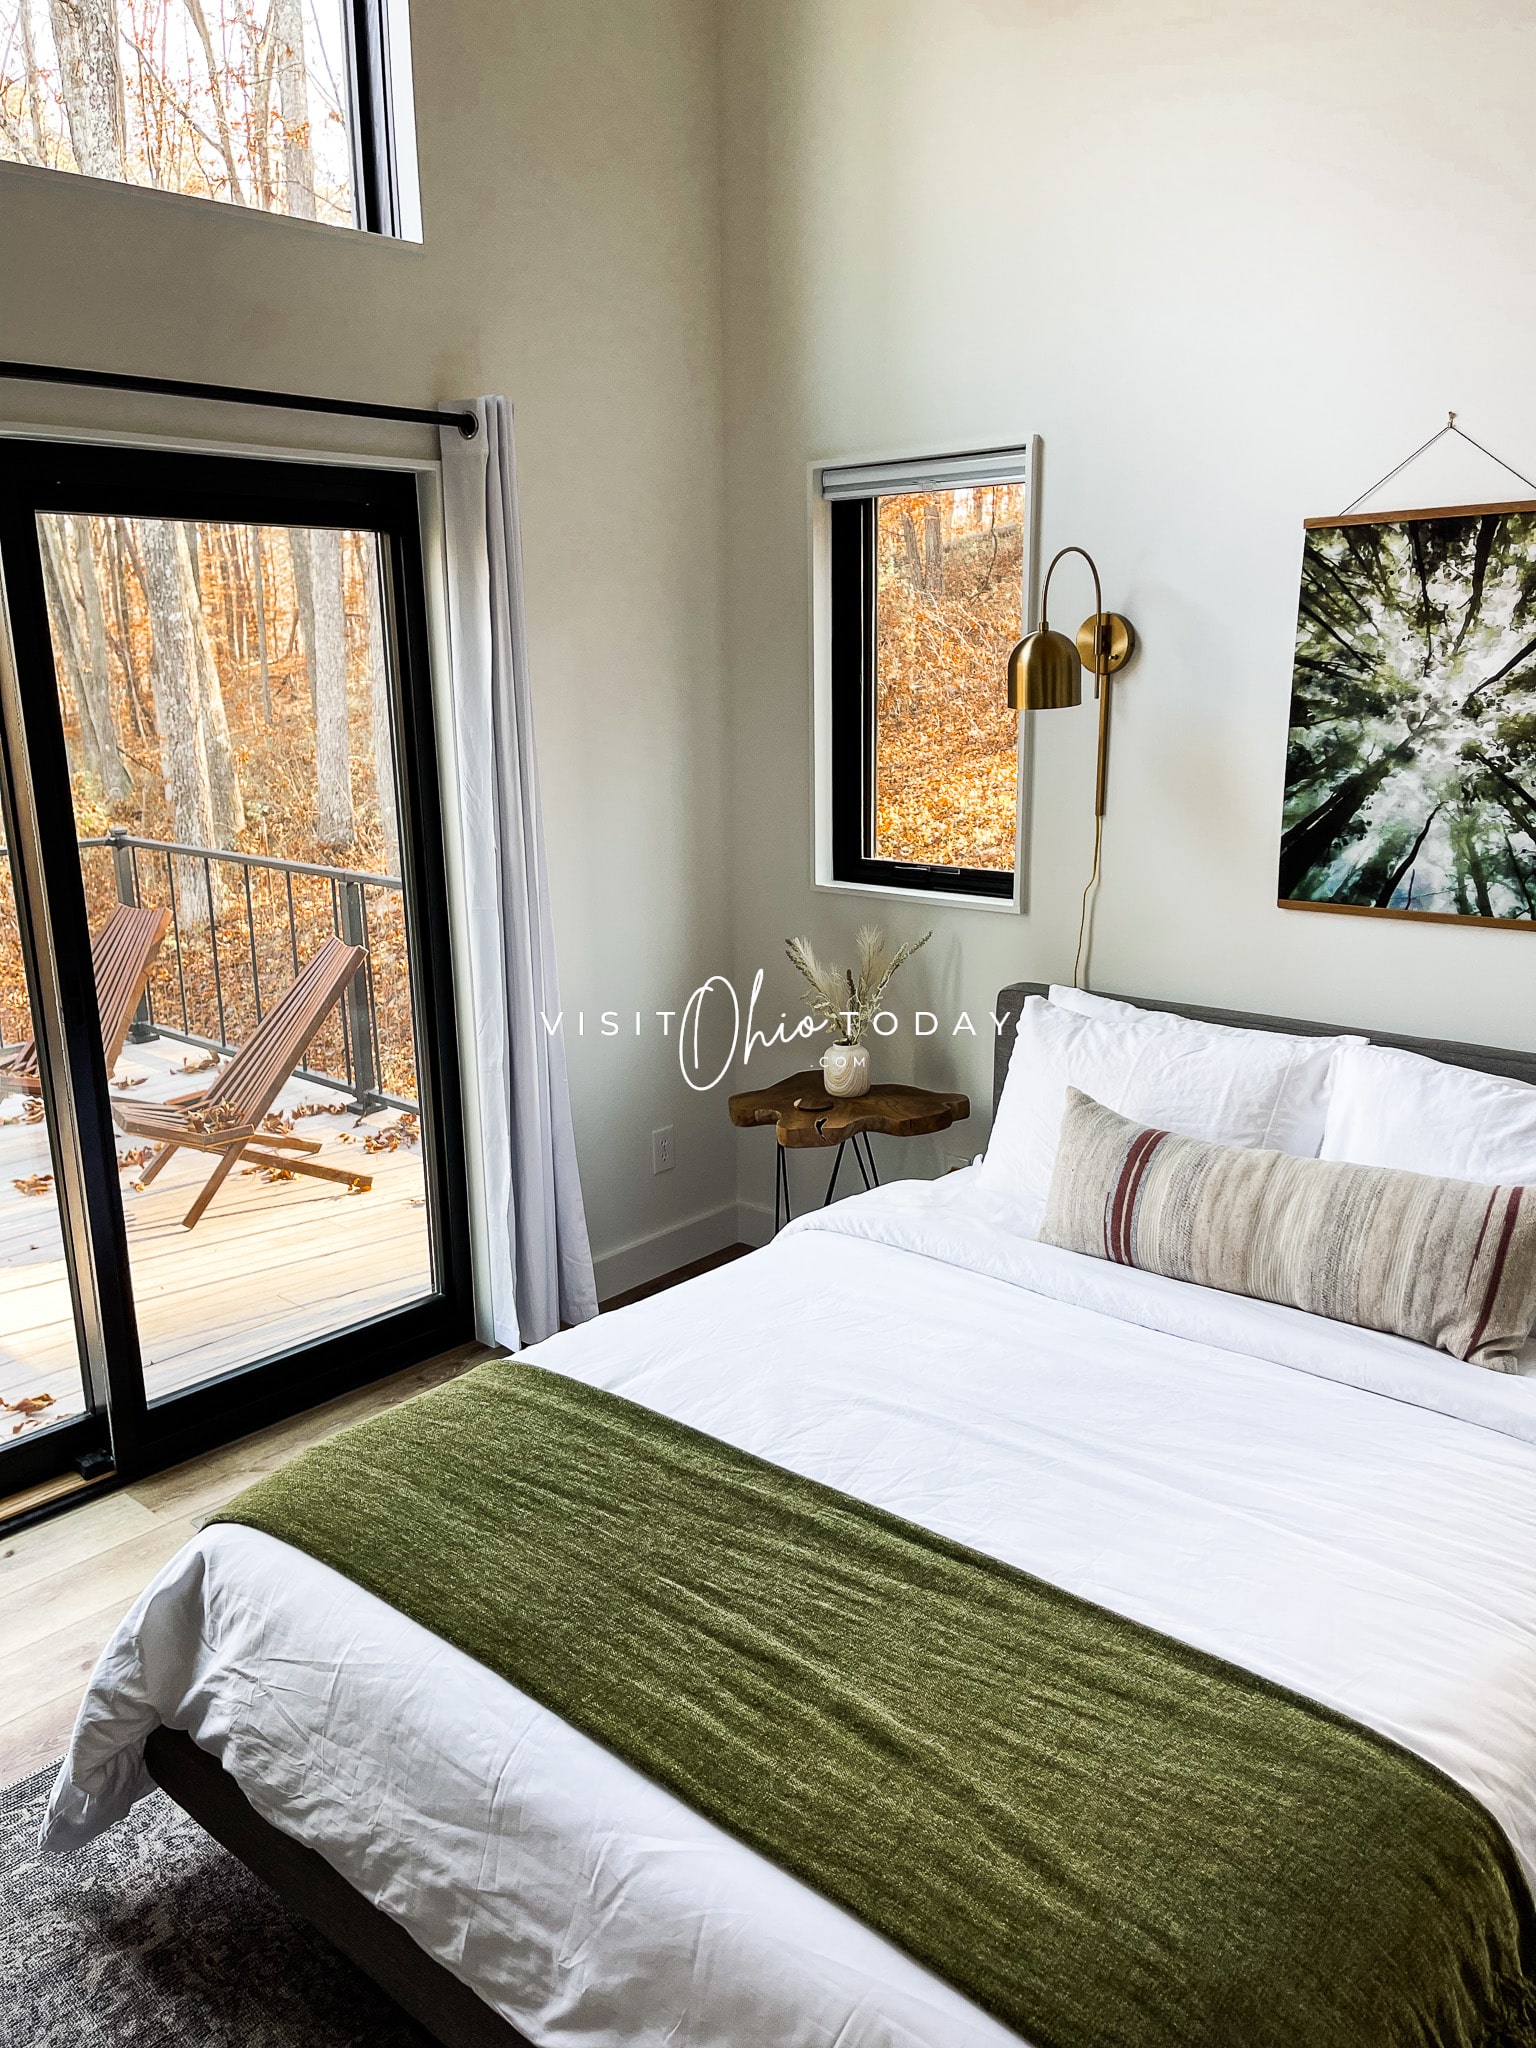 owners suite at ravenhaus, white bed with green blanket folded at end. Pillows on bed, frame on wall, windows that show forest outside Photo credit: Cindy Gordon of VisitOhioToday.com